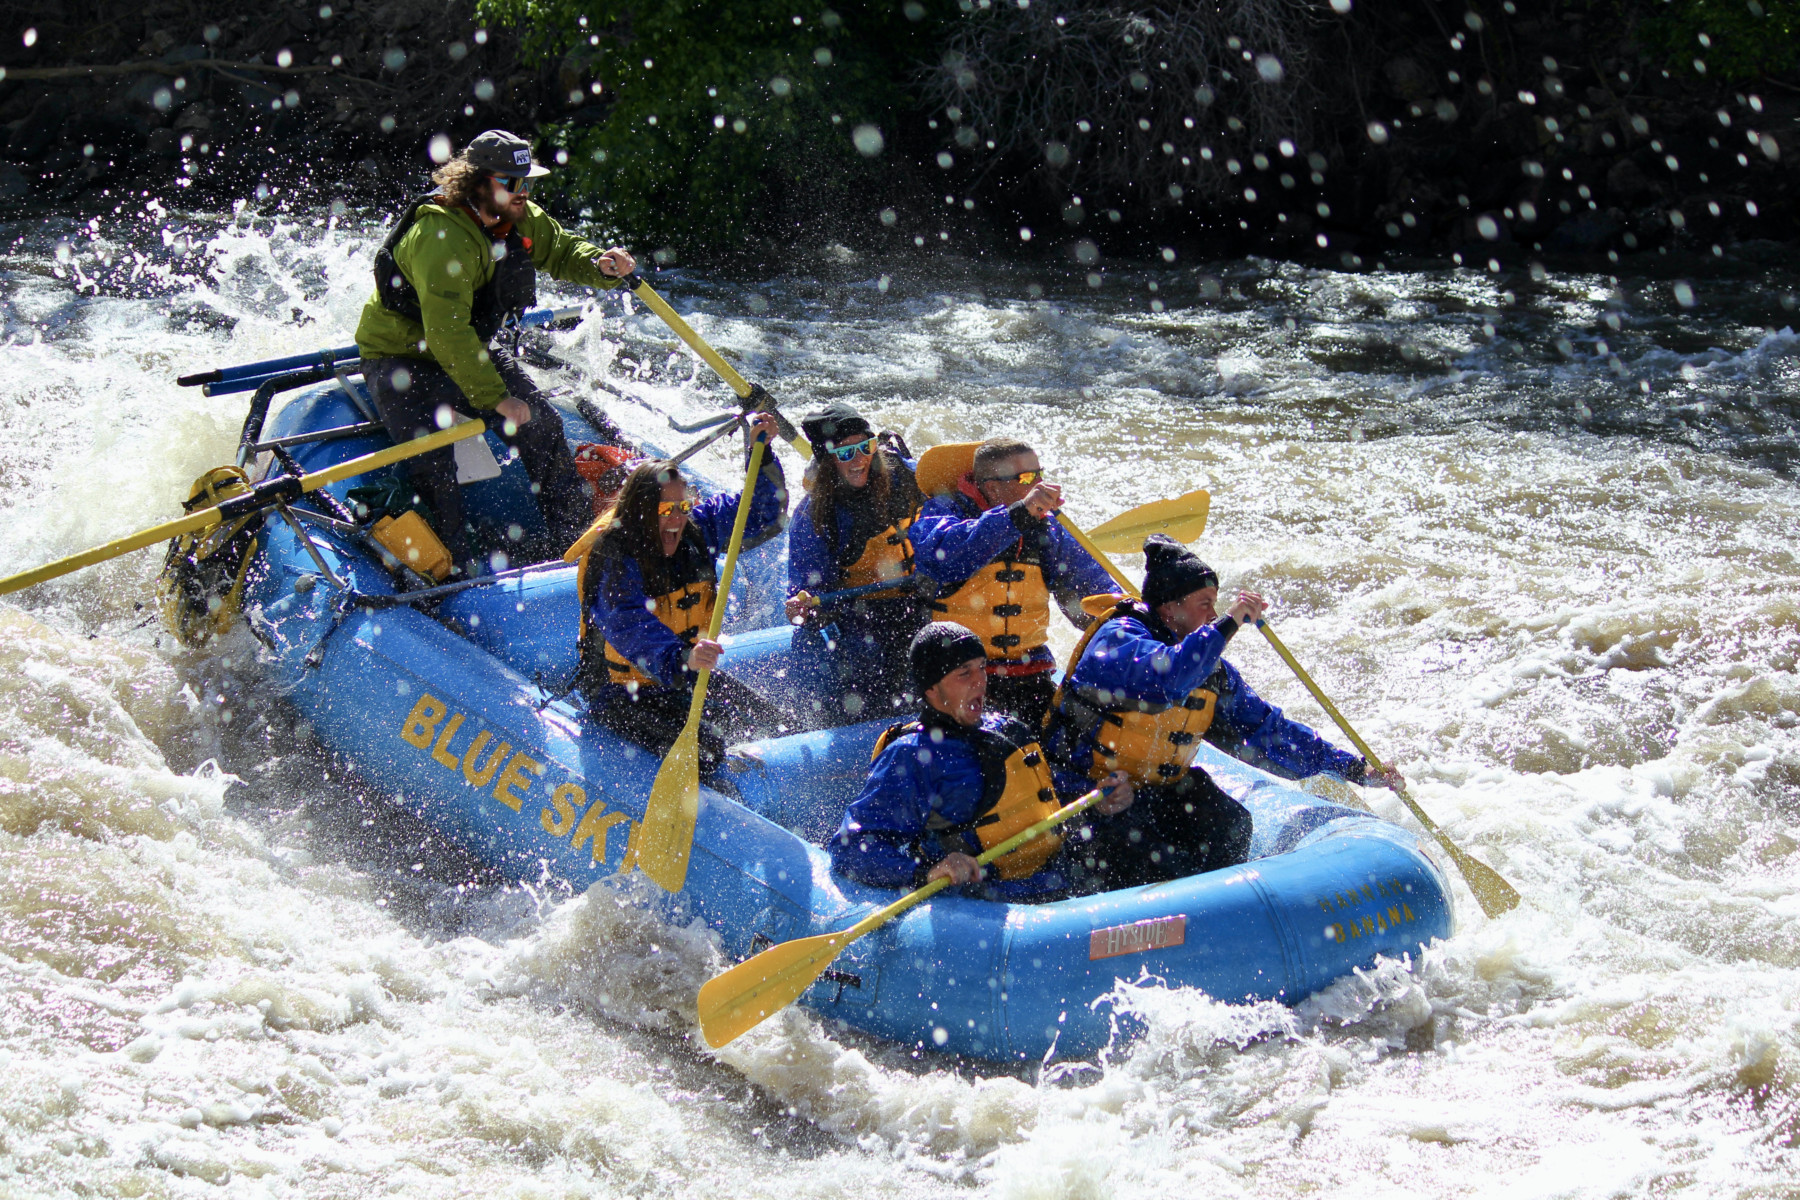 An image capturing the adventure of a Blue Sky-branded raft navigating the Shoshone Rapids on the Colorado River.